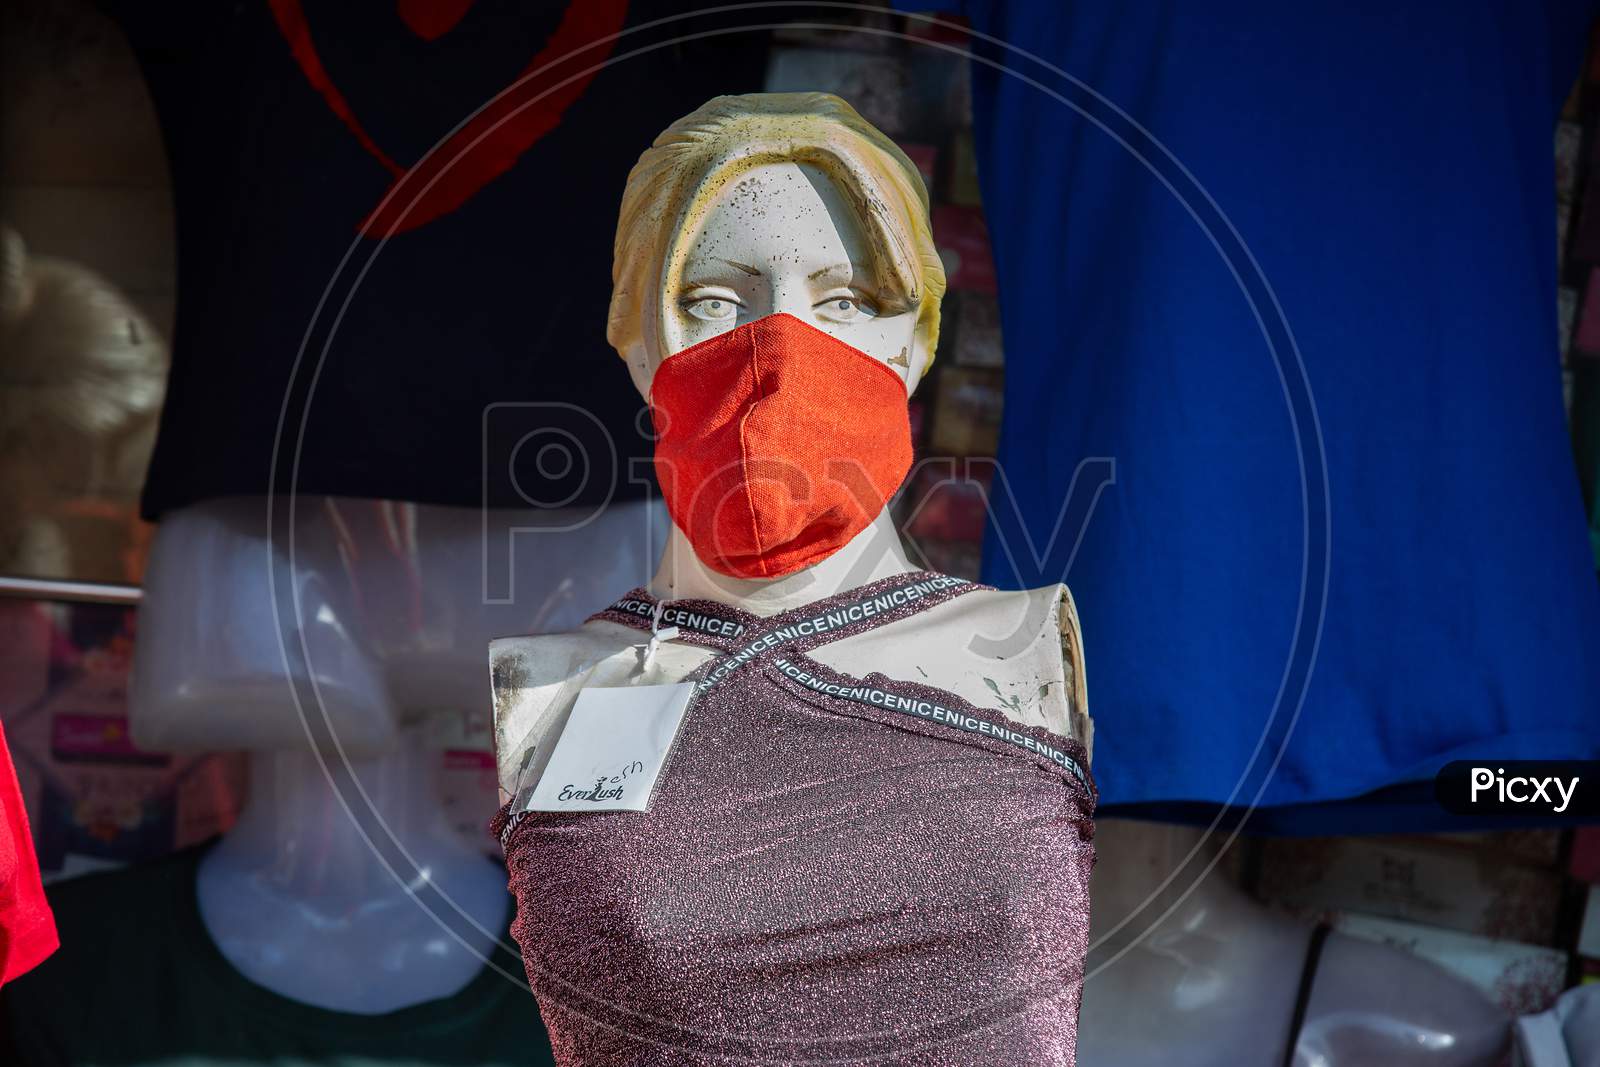 Jodhpur, Rajasthan, India - May 20 2020: Female Mannequin With Mask On Face. Shops Are Reopening After Lock Down Restrictions Due To The Covid-19 Pandemic, Back To Normal Life With Few Safety Measure.